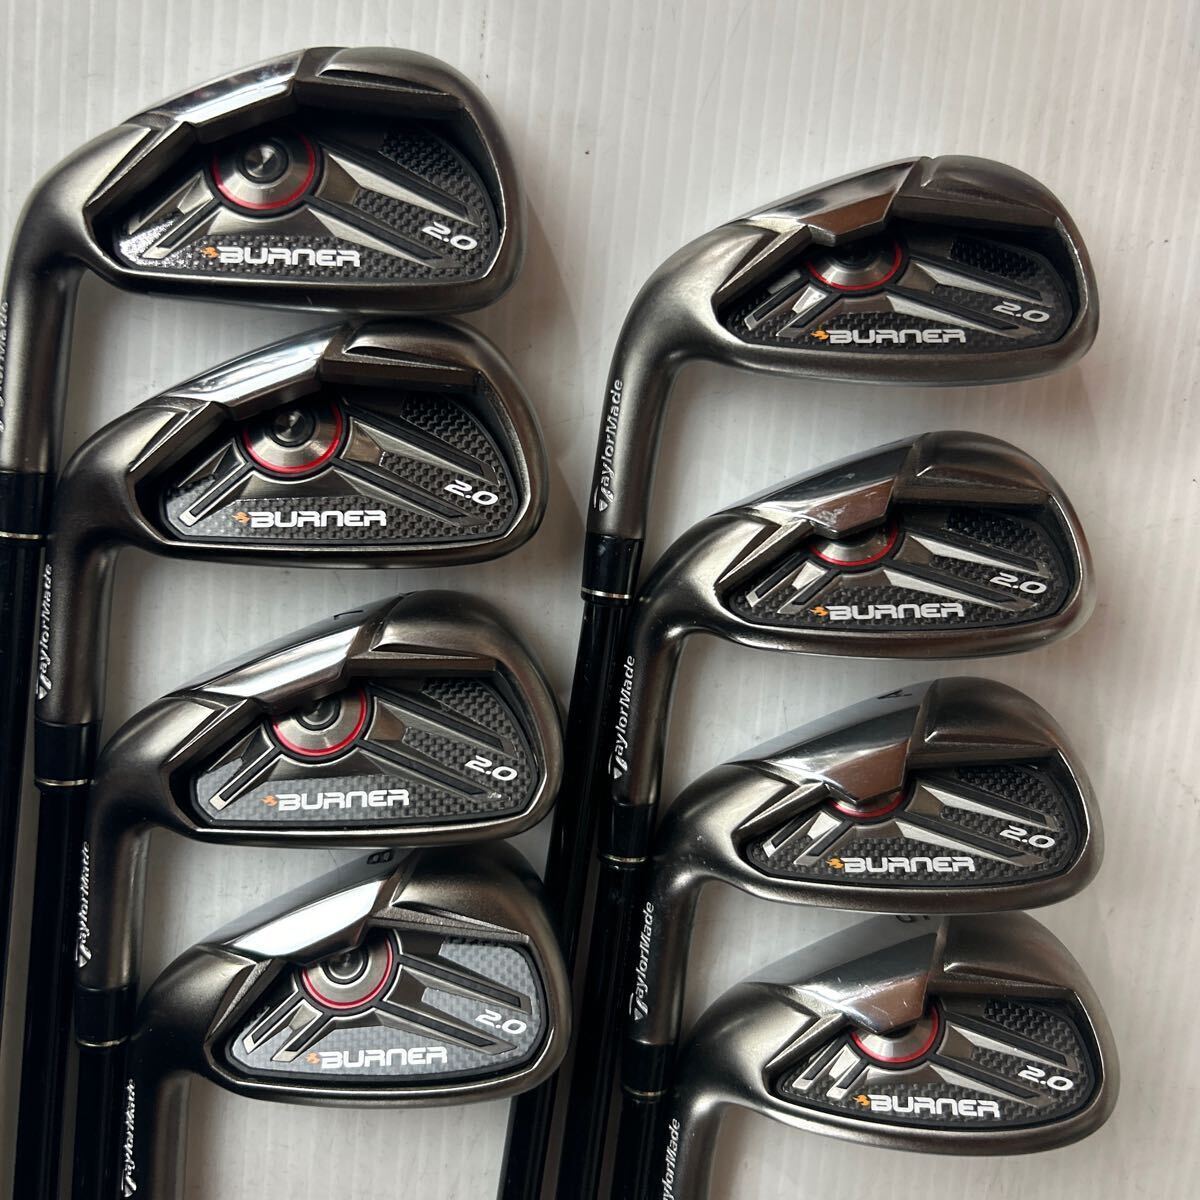 Iron TaylorMade BURNER 2.0 for left handed 5.6.7.8.9.PW. AW.SW 8 piece set F